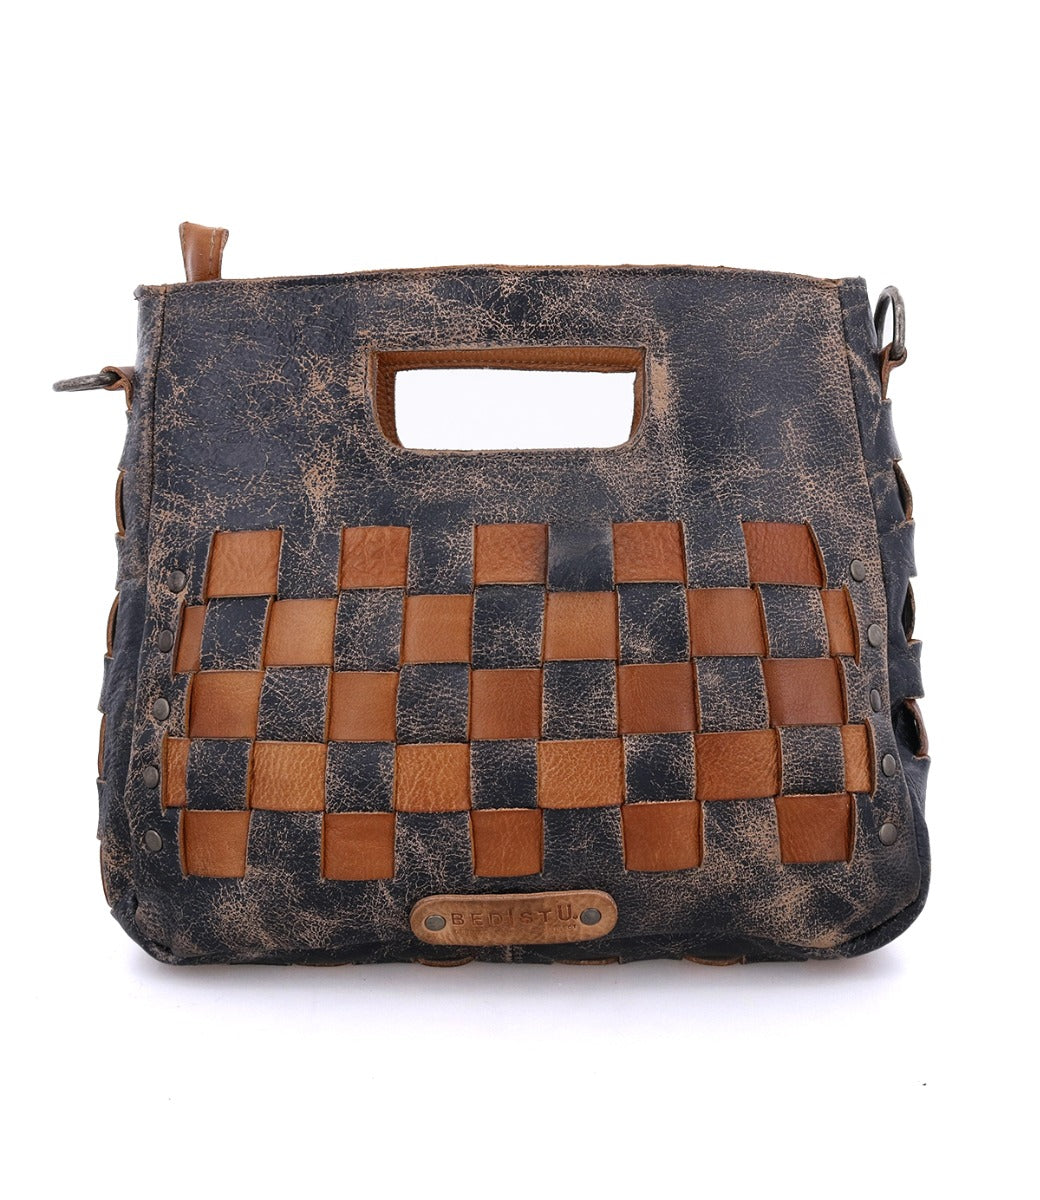 A Keiki bag by Bed Stu, made of black and tan leather with a checkered pattern.